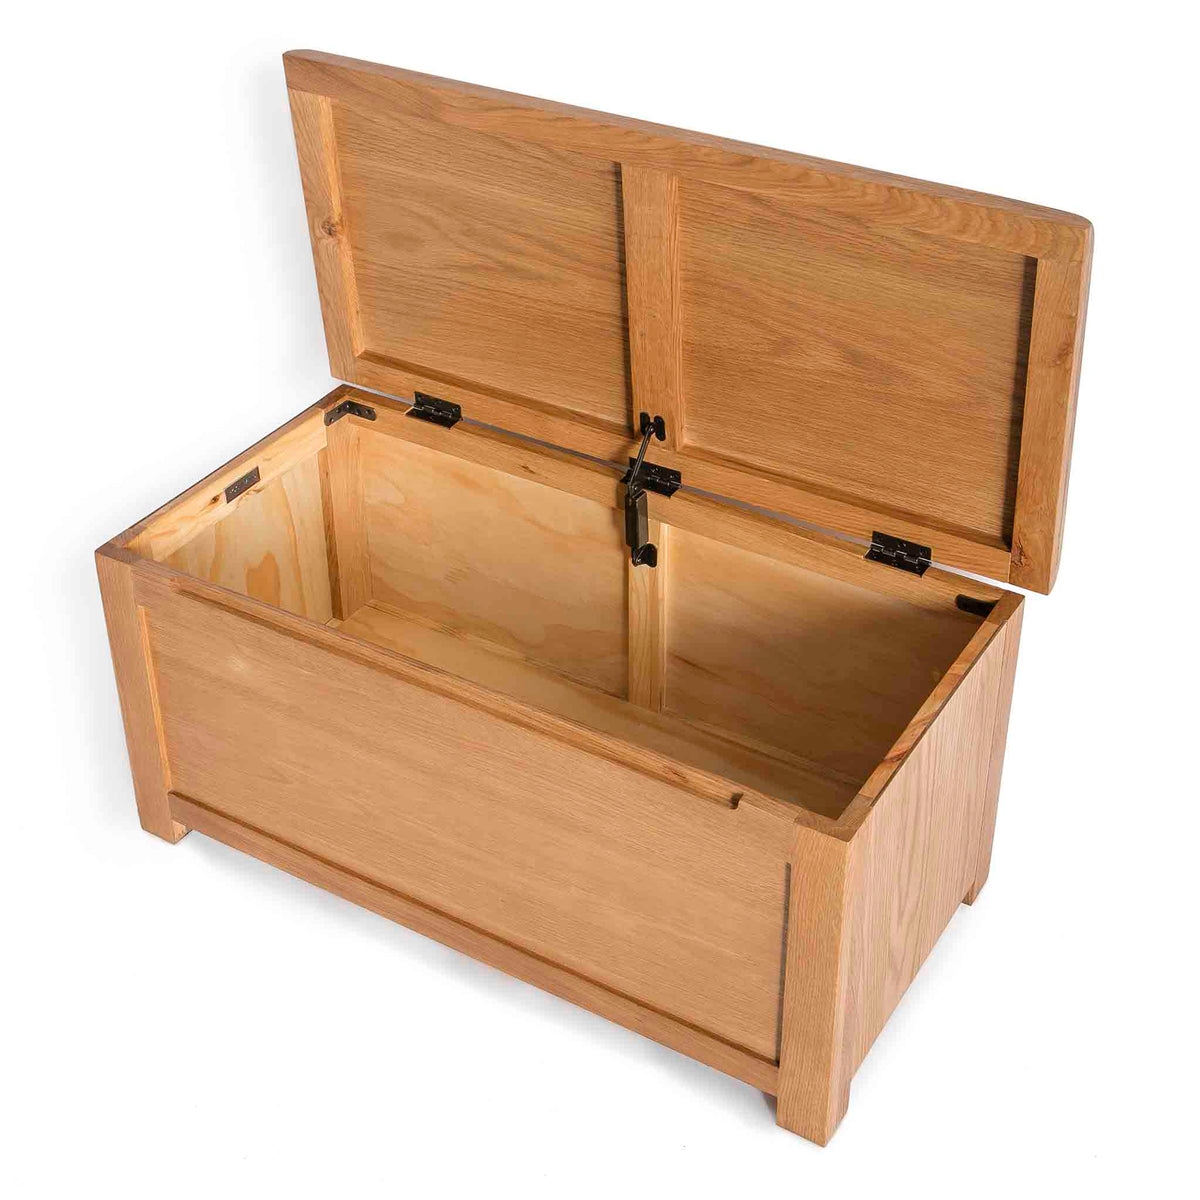 Surrey Oak Blanket Box / Ottoman - Arial view with lid open